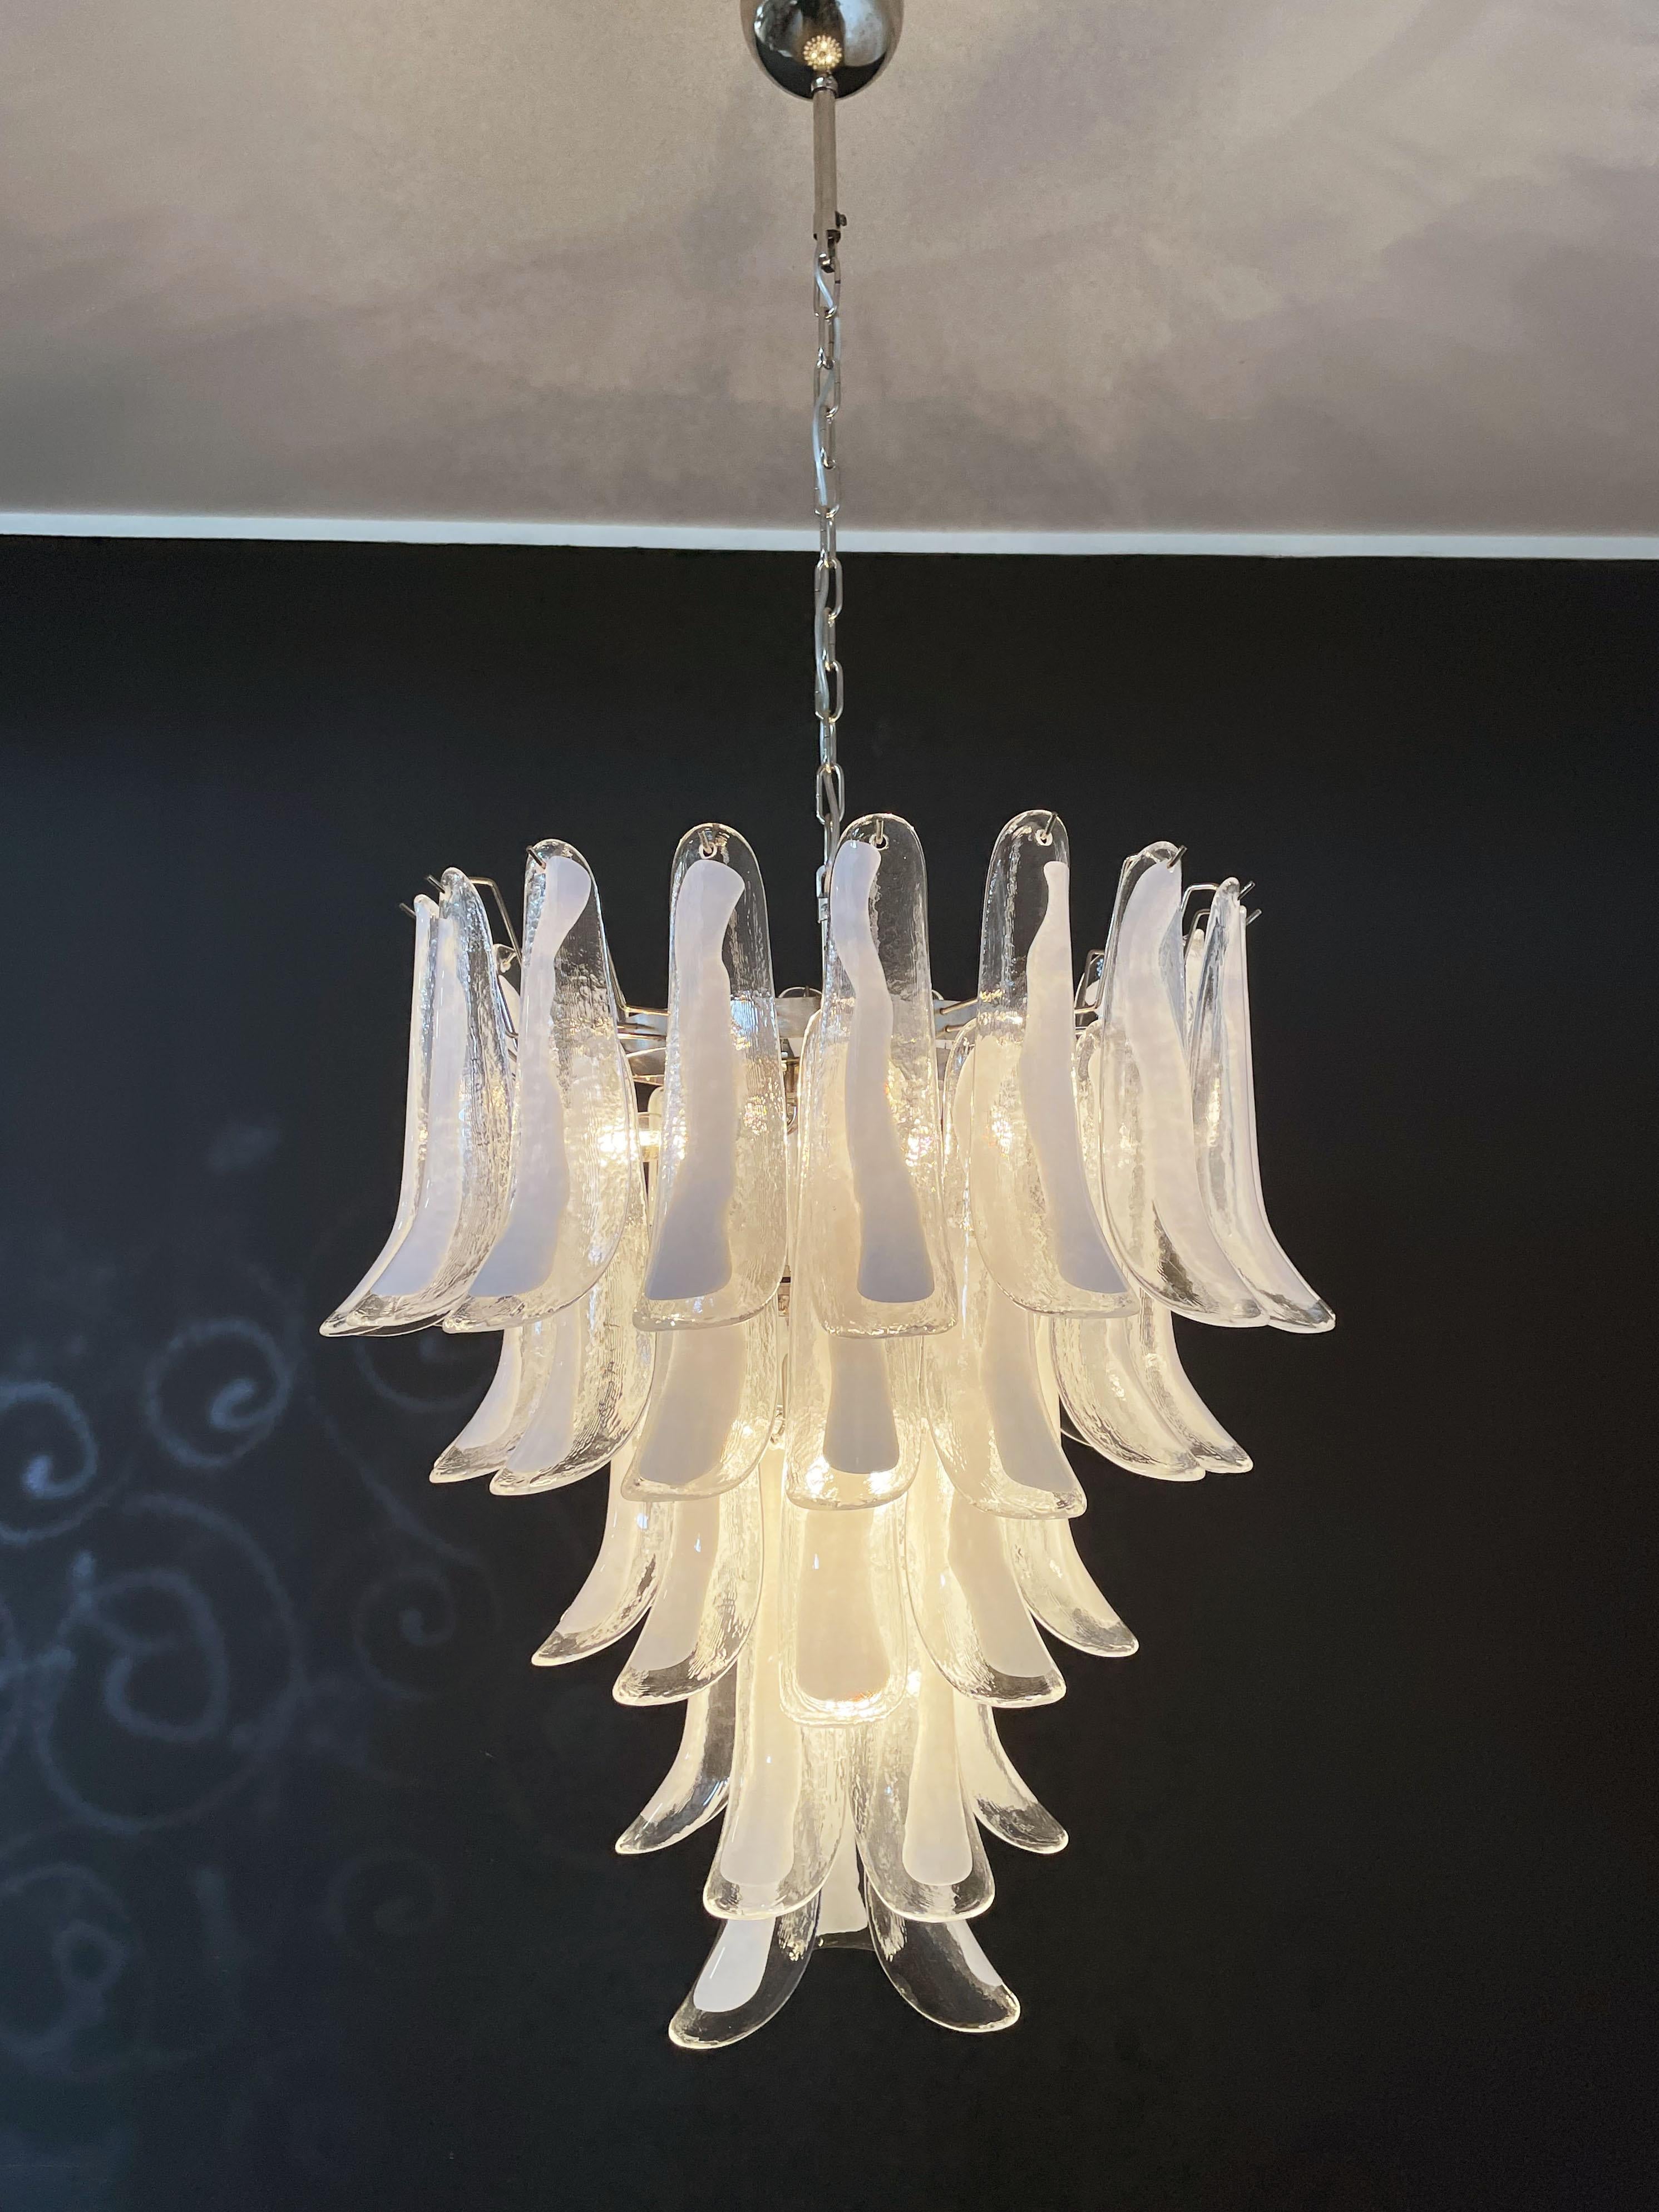 Italian vintage Murano chandelier in the manner of Mazzega - 52 glass petals For Sale 7